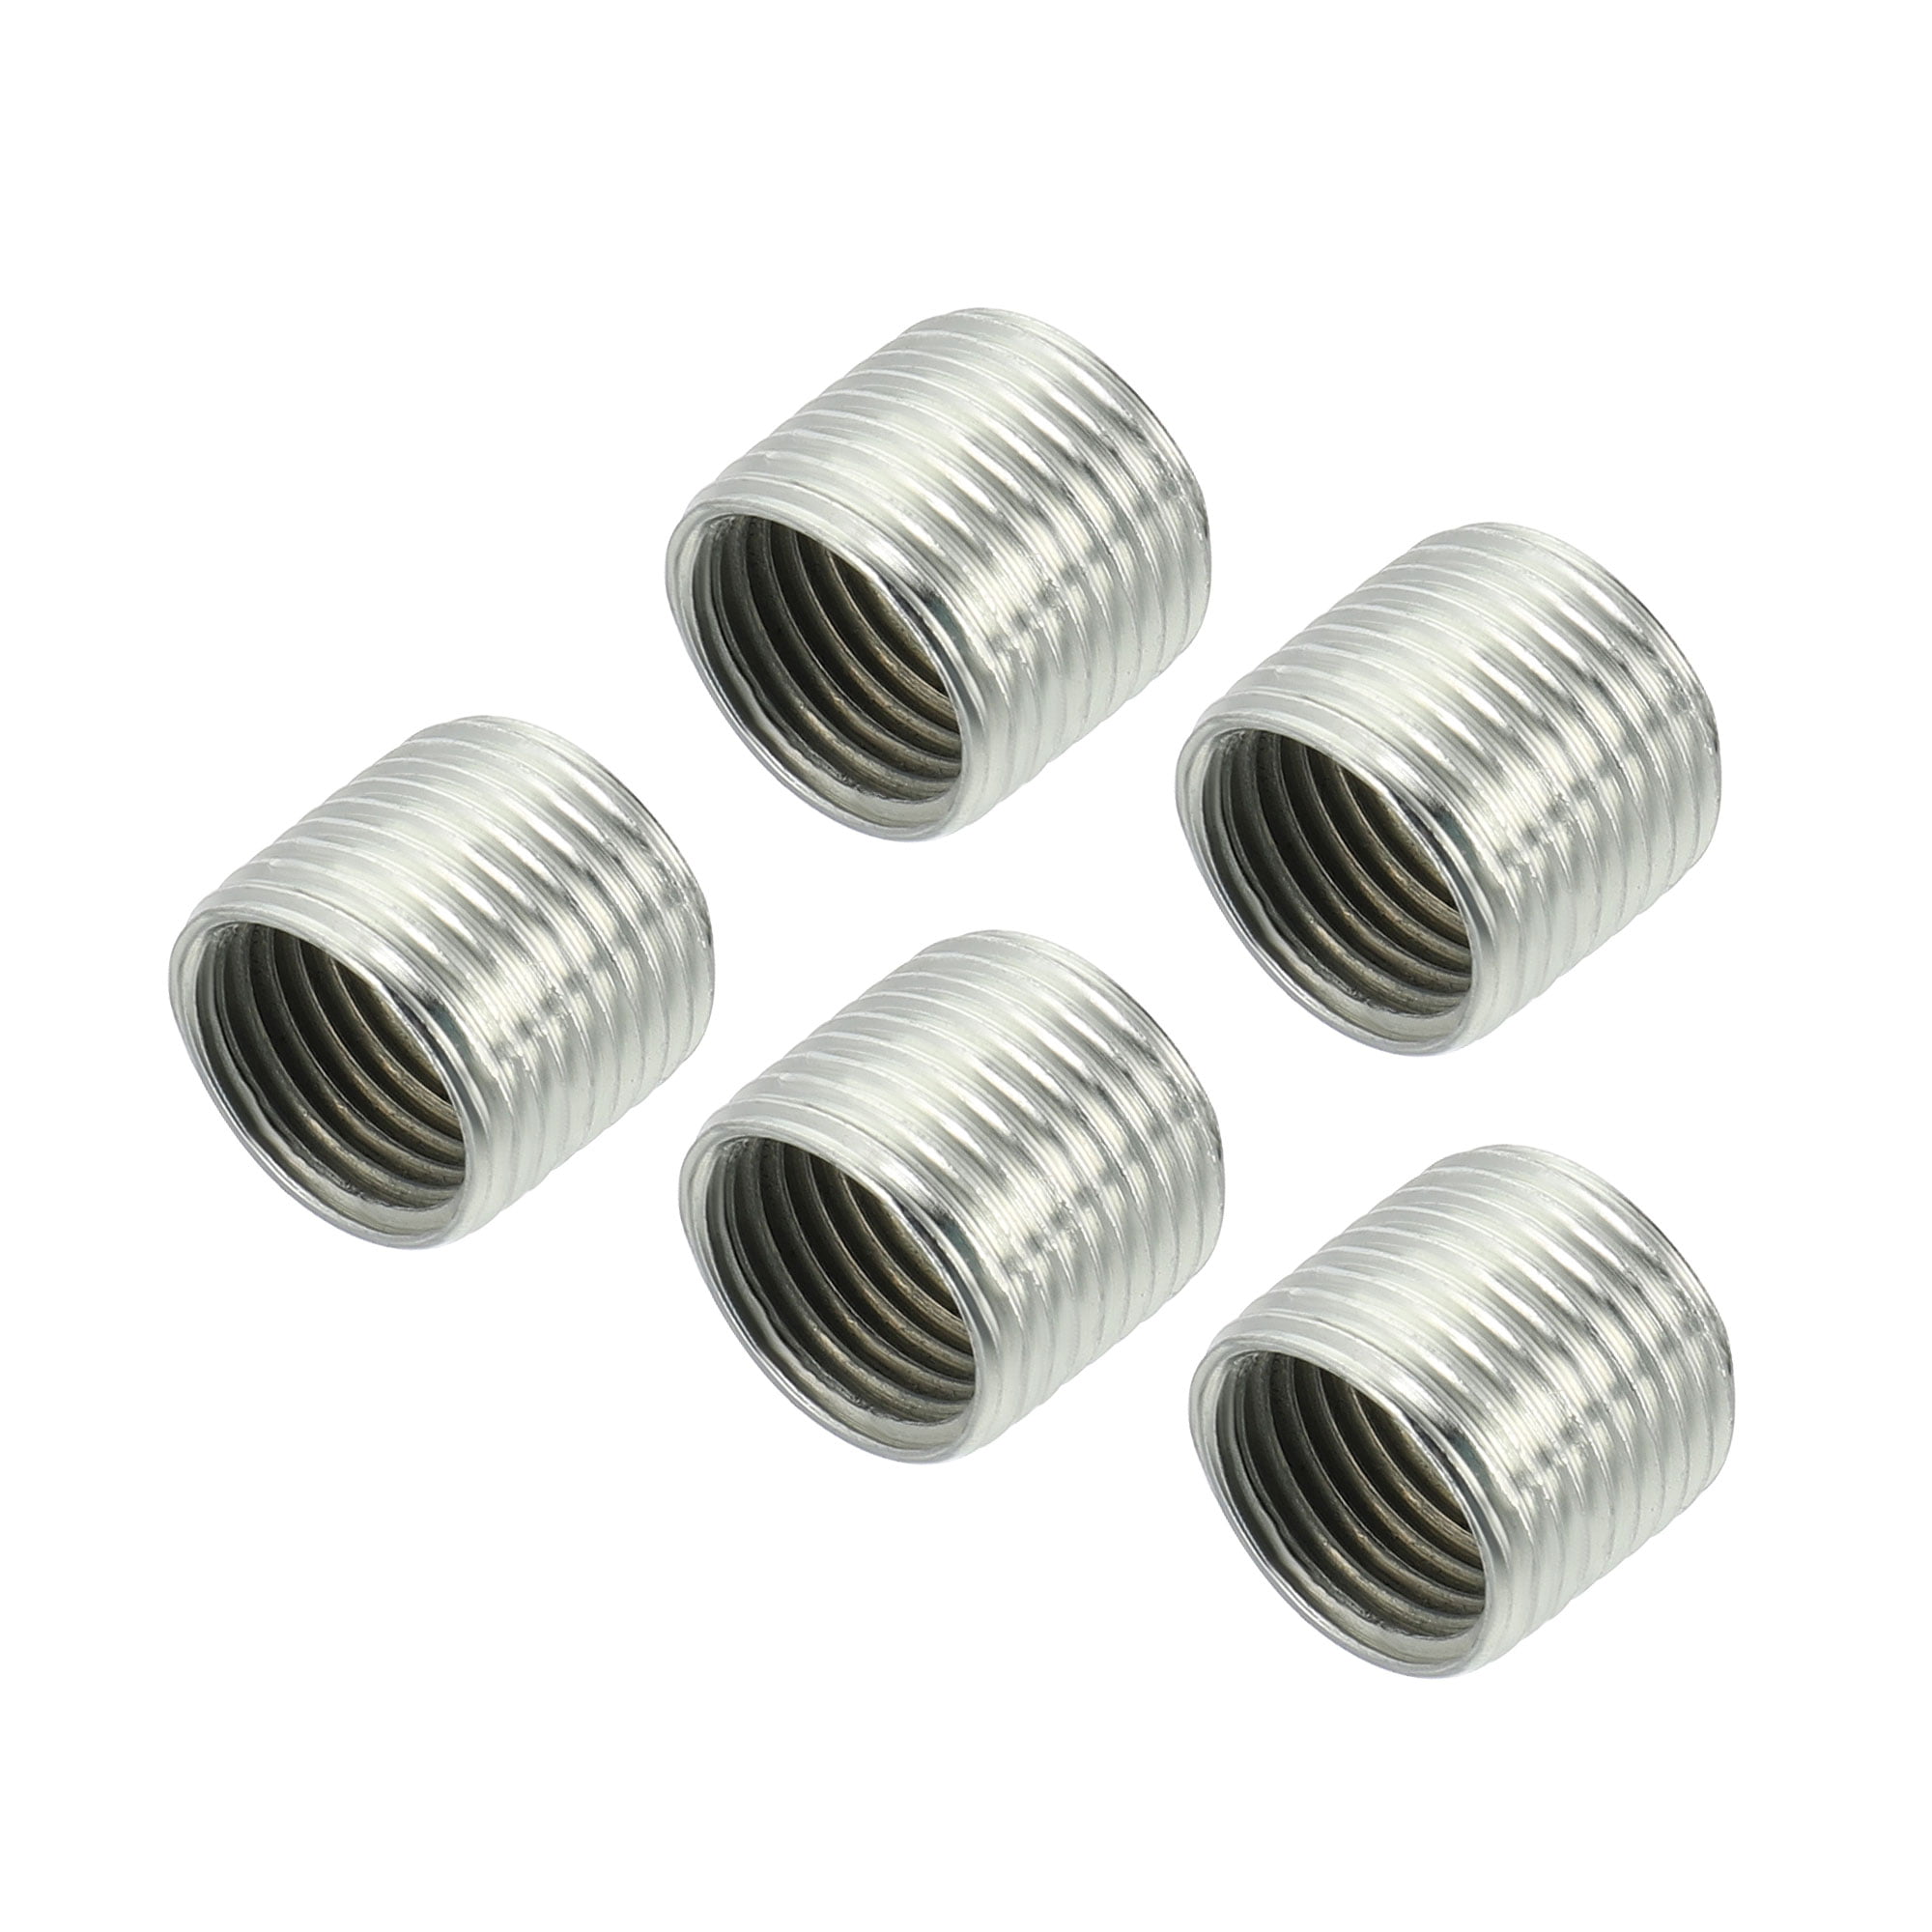 5 X Thread Adapters Reducers Threaded A2L3 M10 10mm Male to M8 8mm Female 